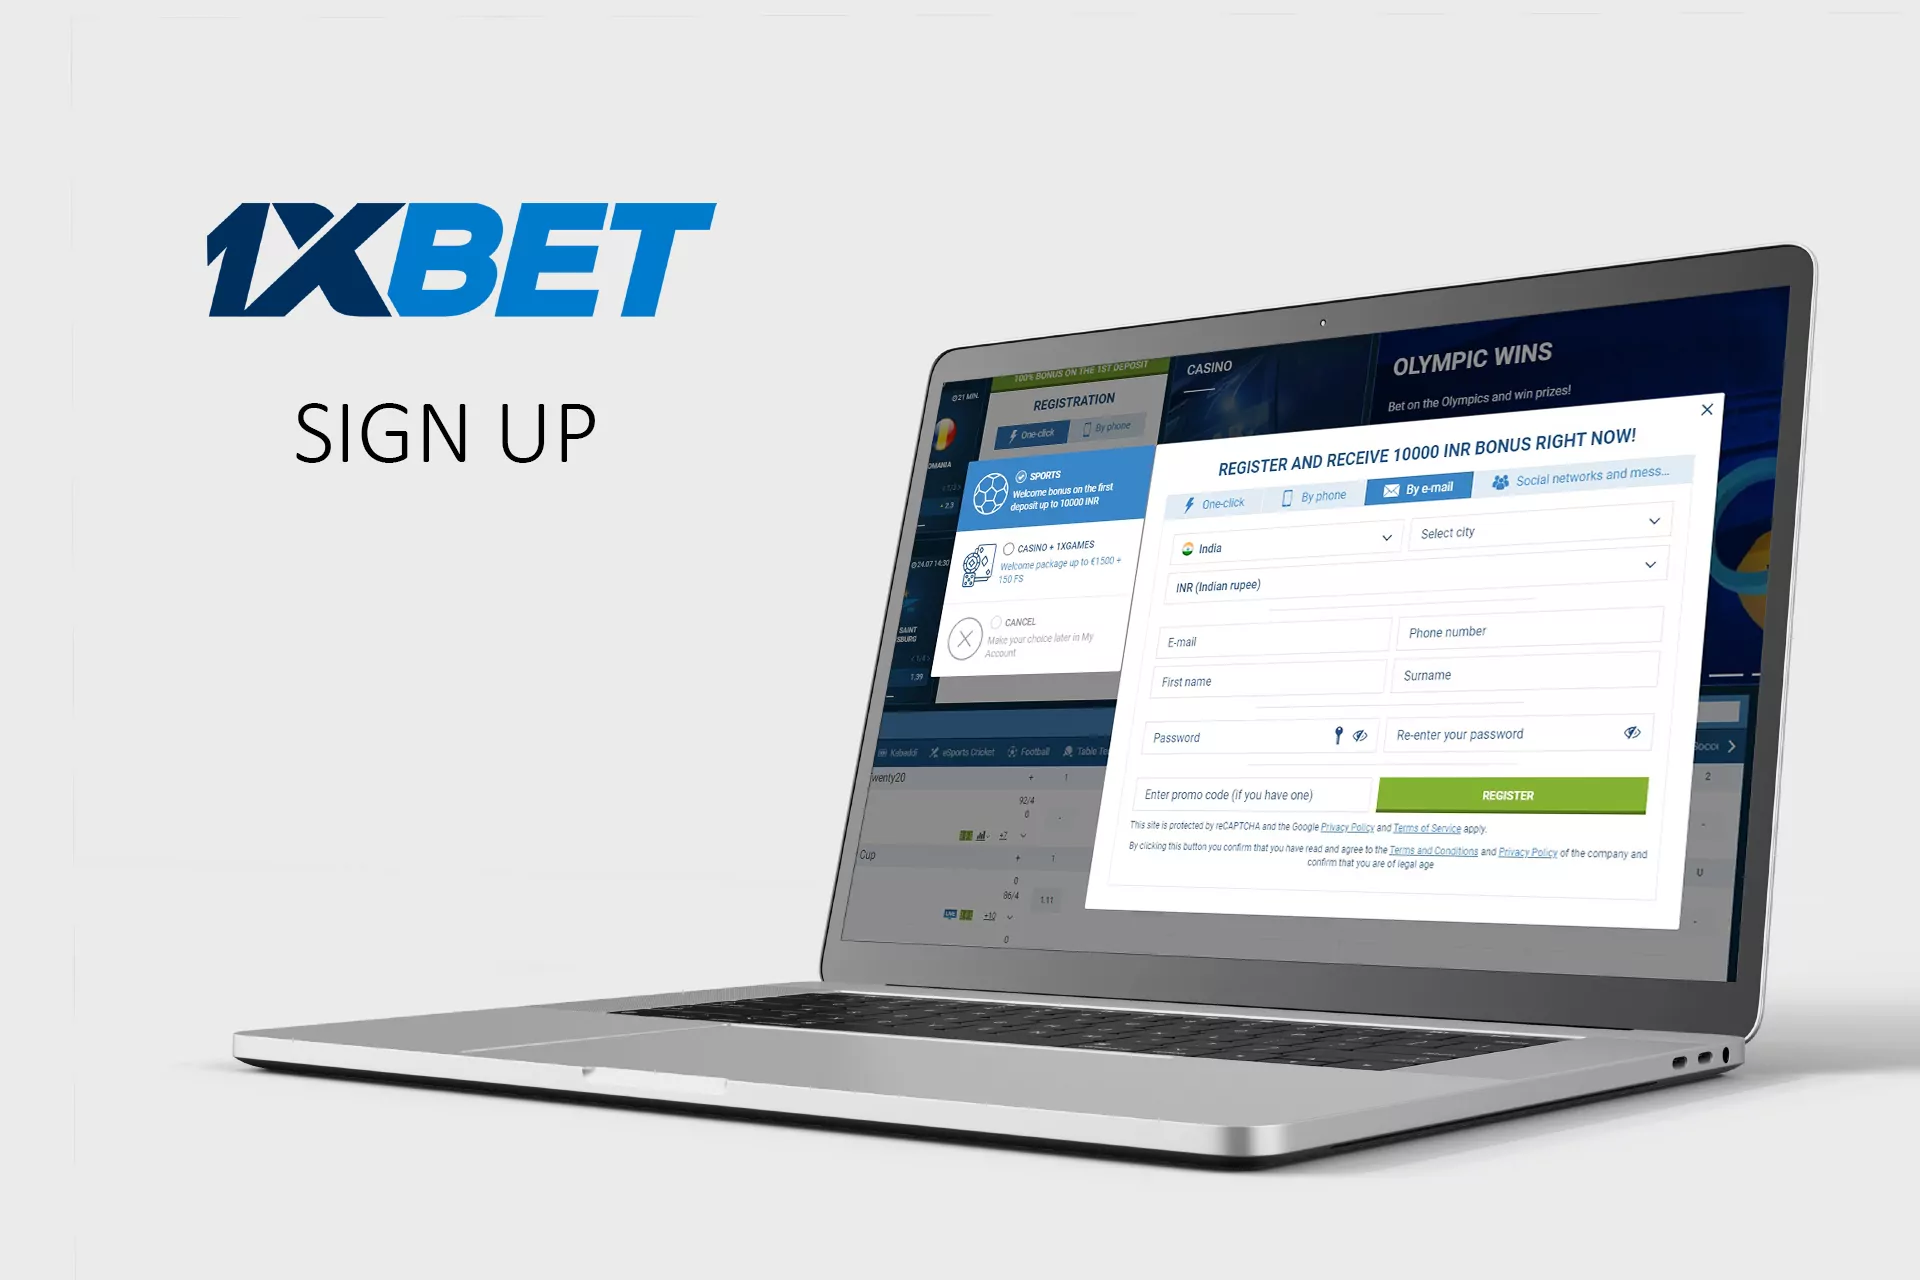 Open the main page of 1xBet and sign up.